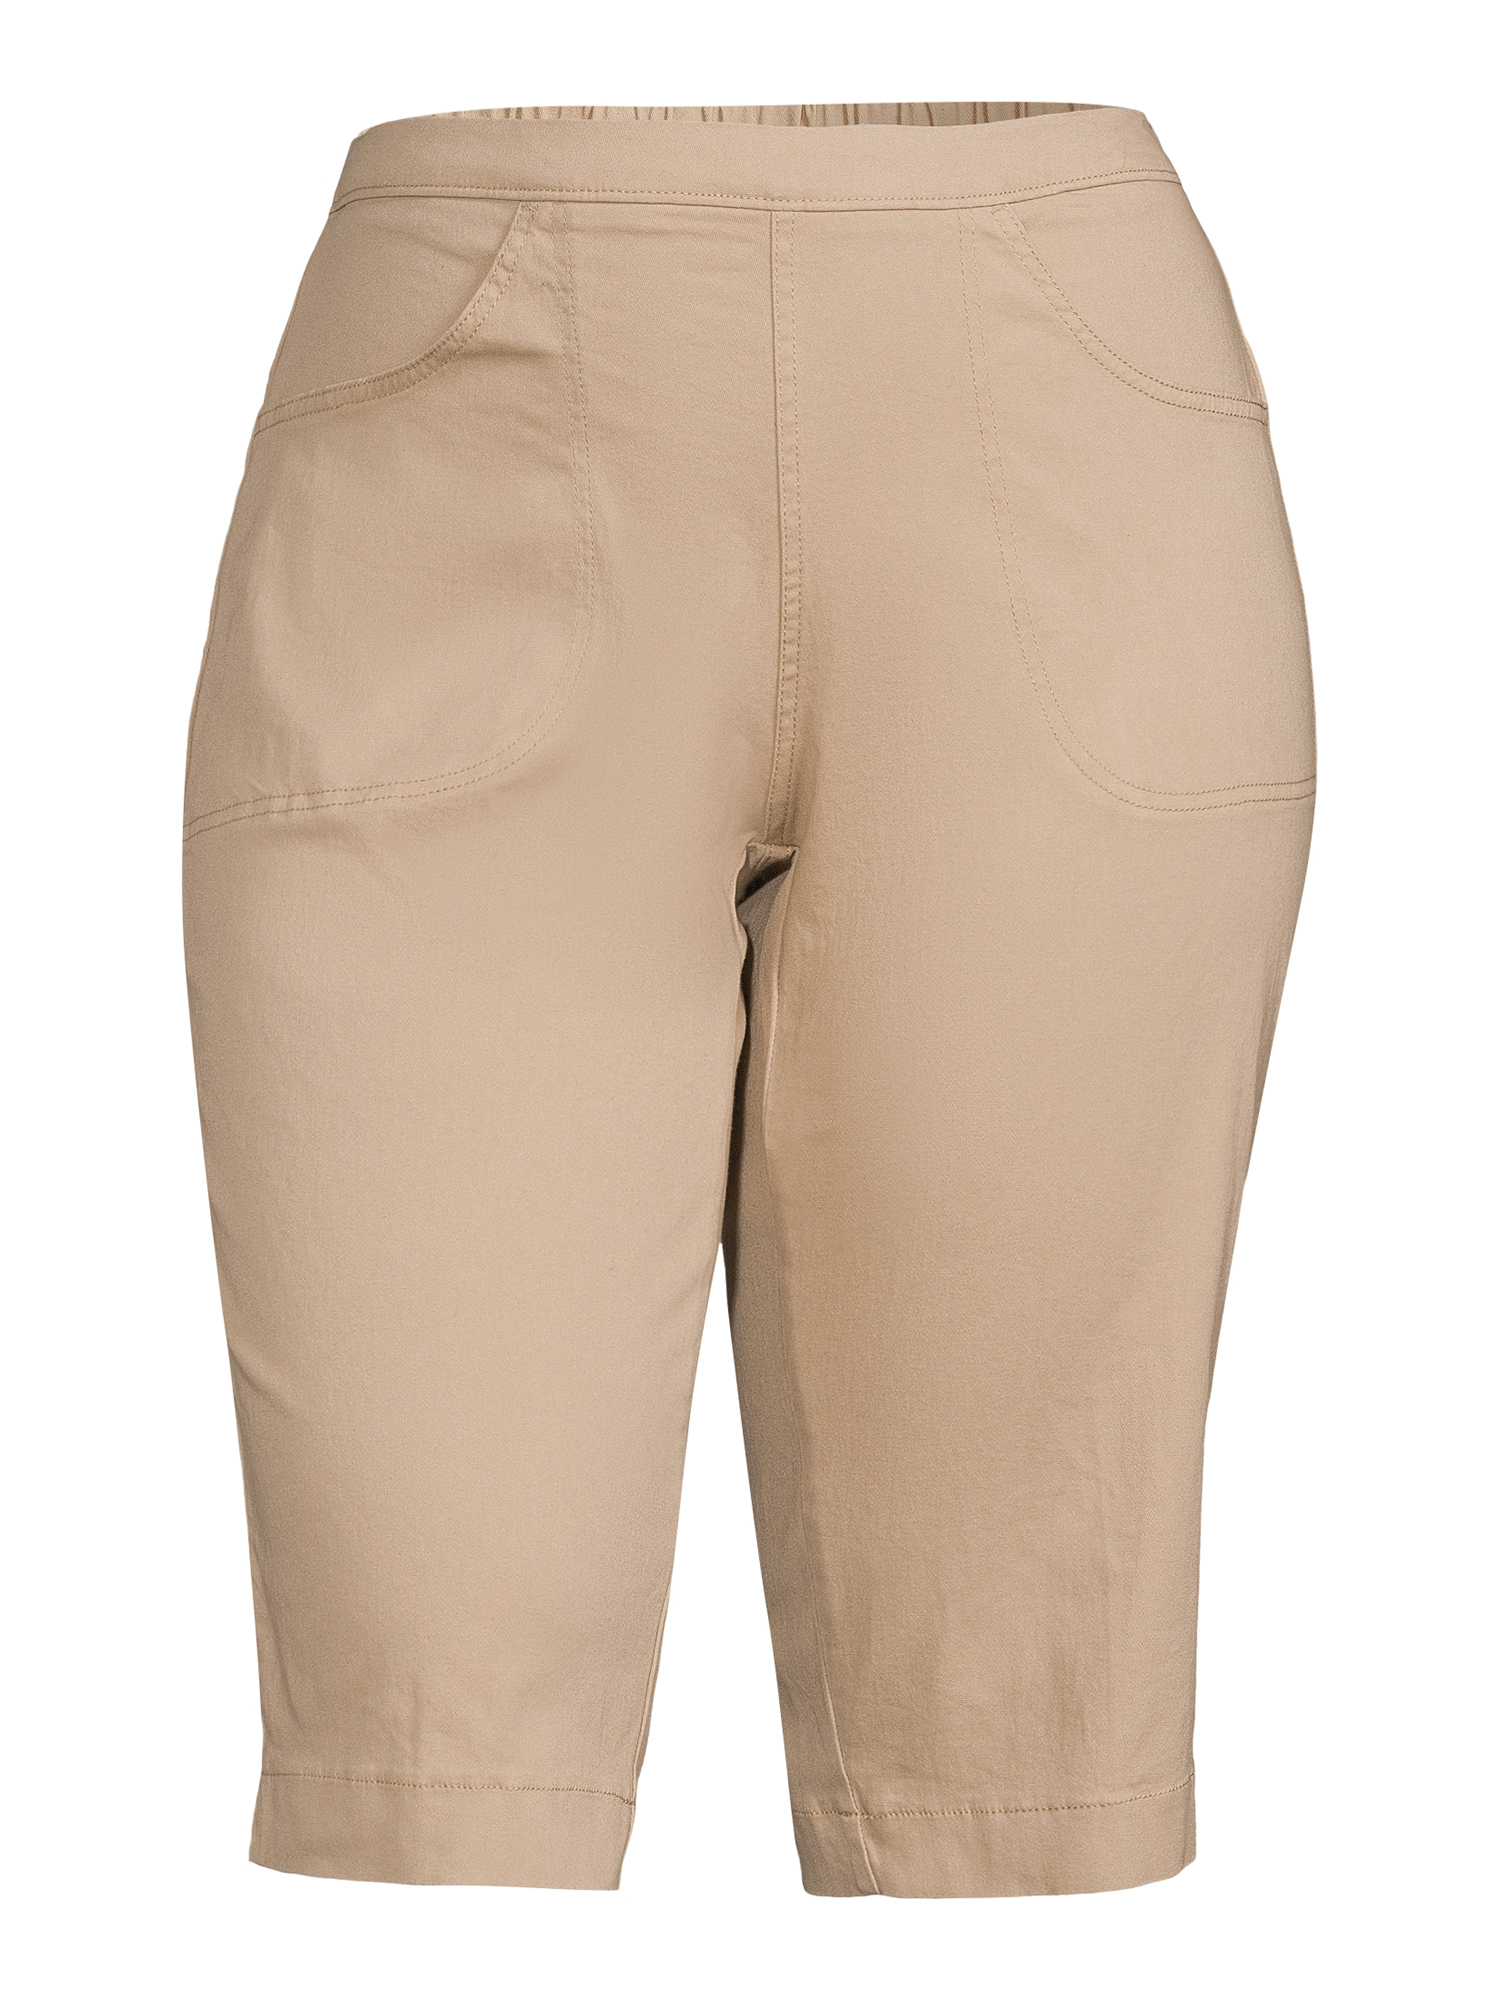 Just My Size Women's Plus Size Pull On 2 Pocket Stretch Capri - image 3 of 6